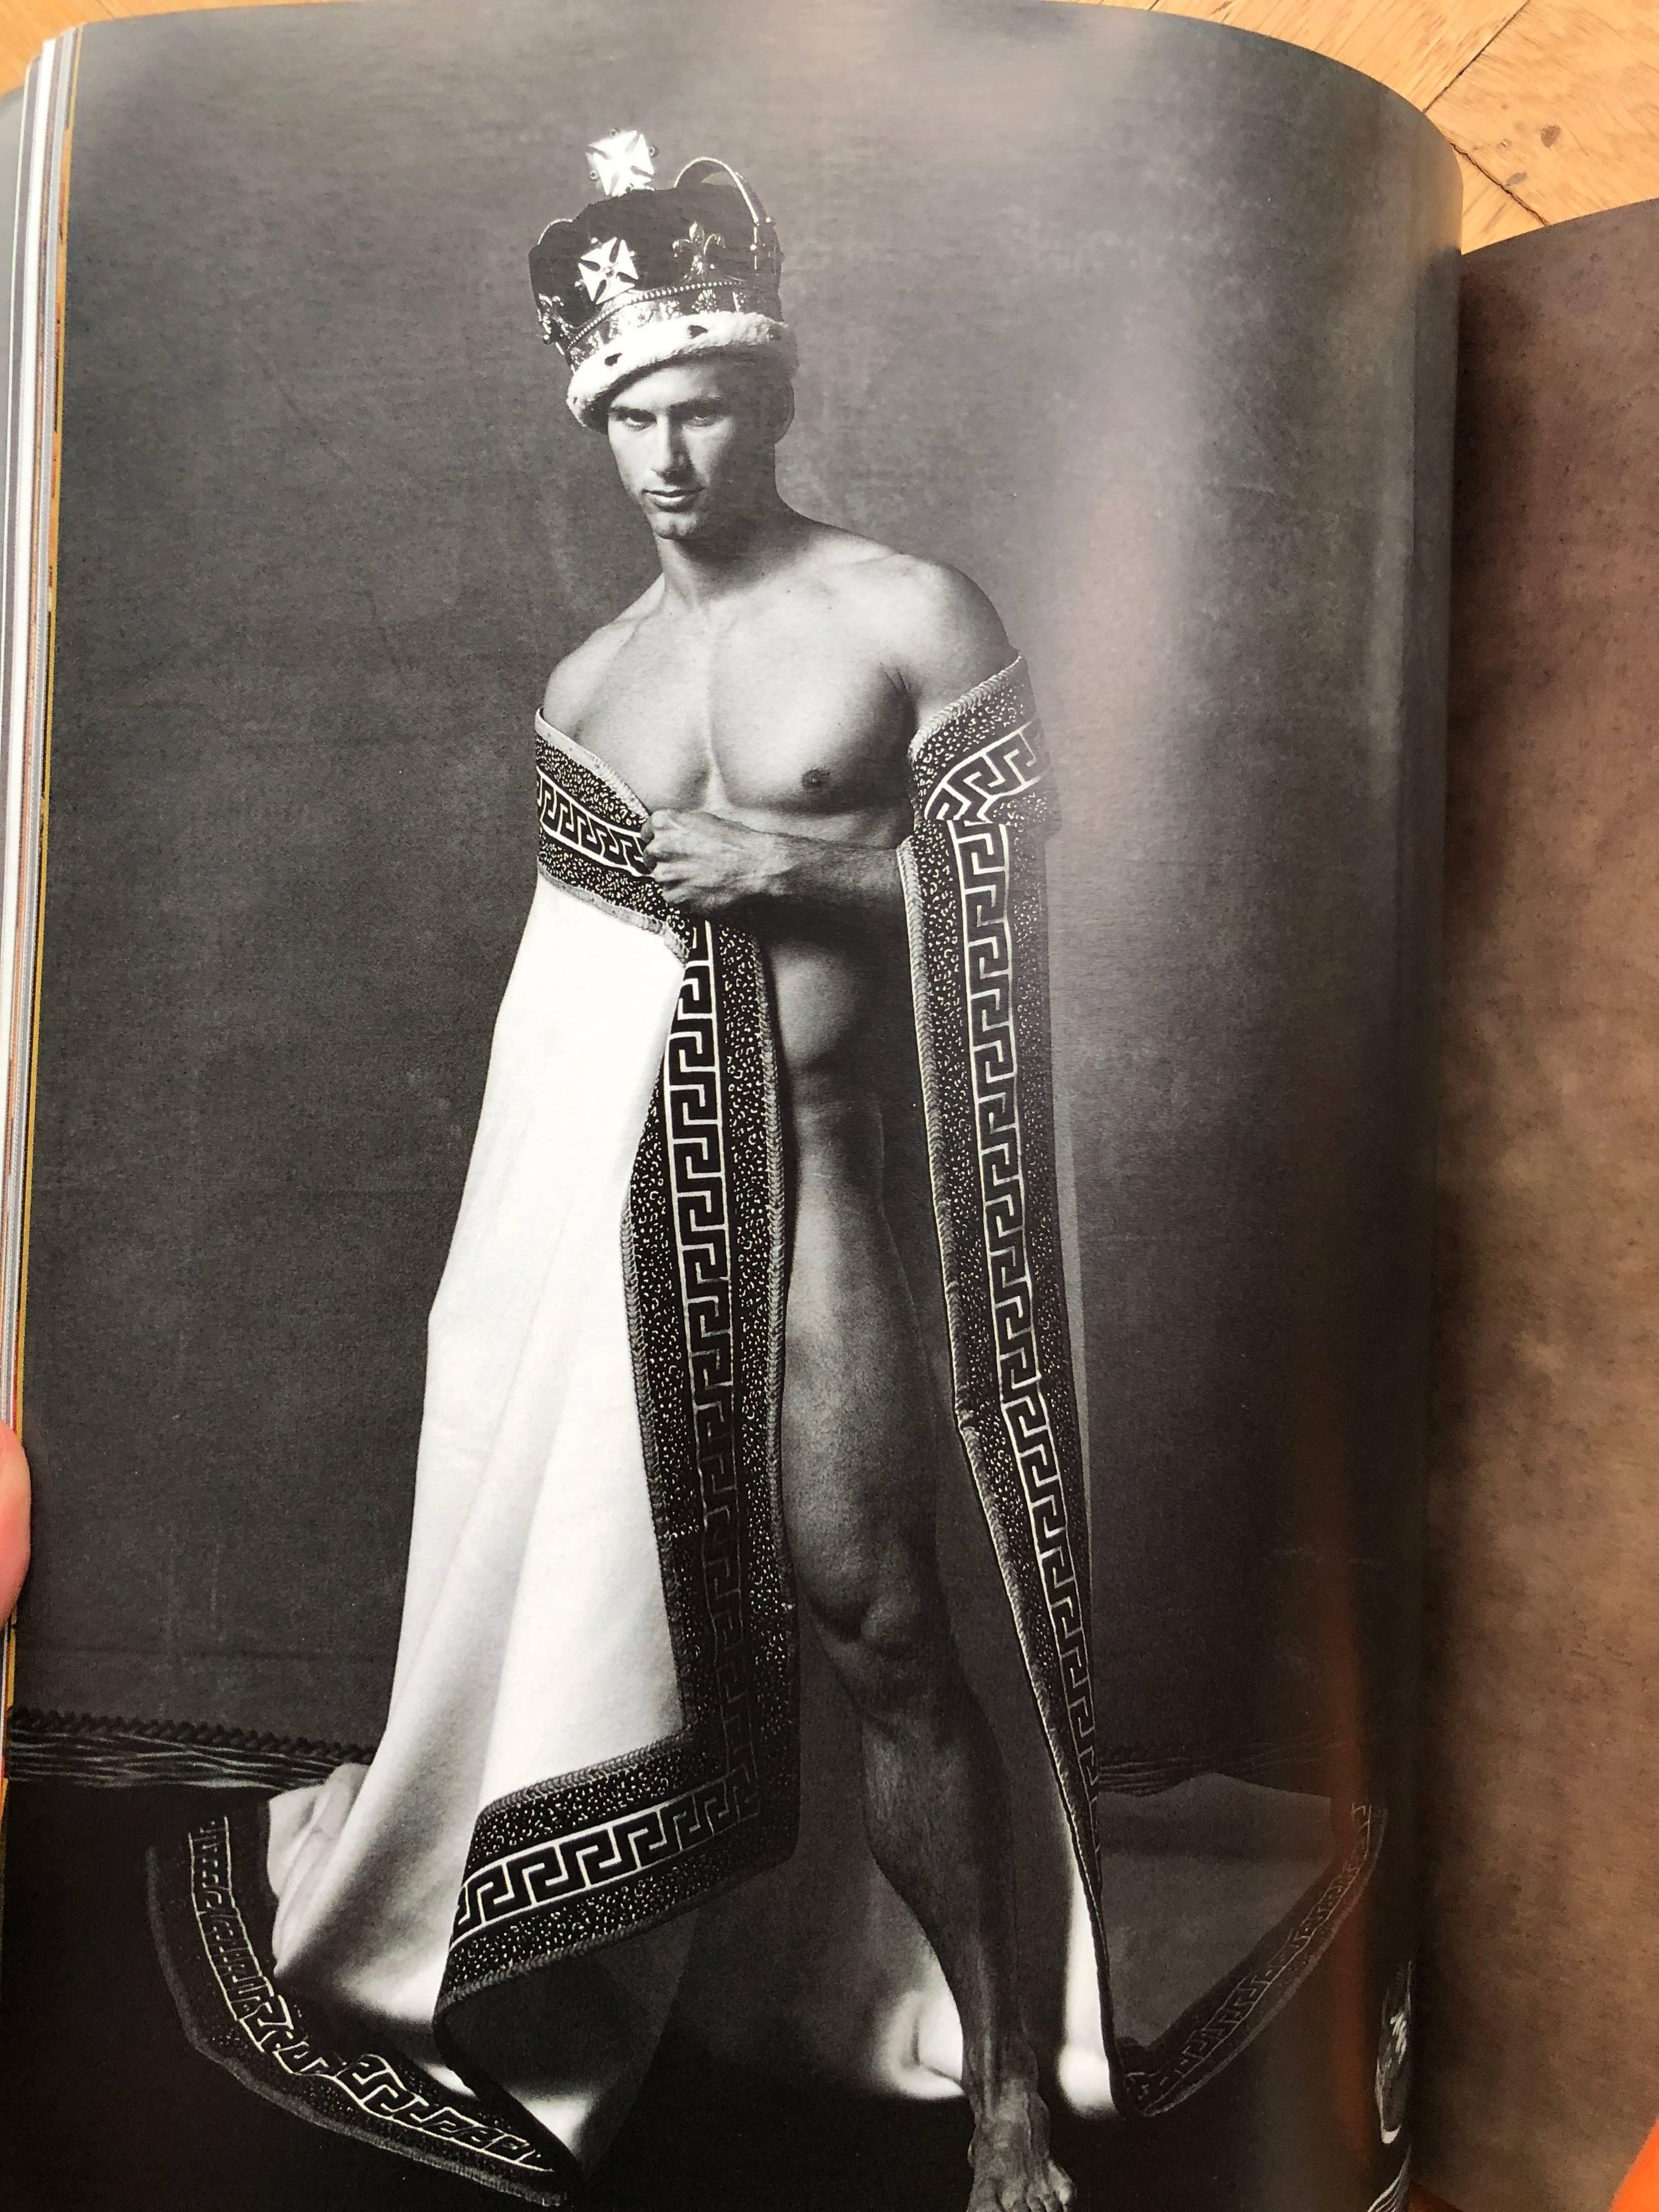 Gianni Versace Uomo Book No. 31 by Bruce Weber Autumn 1996
Gianni Versace documented every collection in the beginning of his career , hiring the best photographers and stylists.
9" x 13"